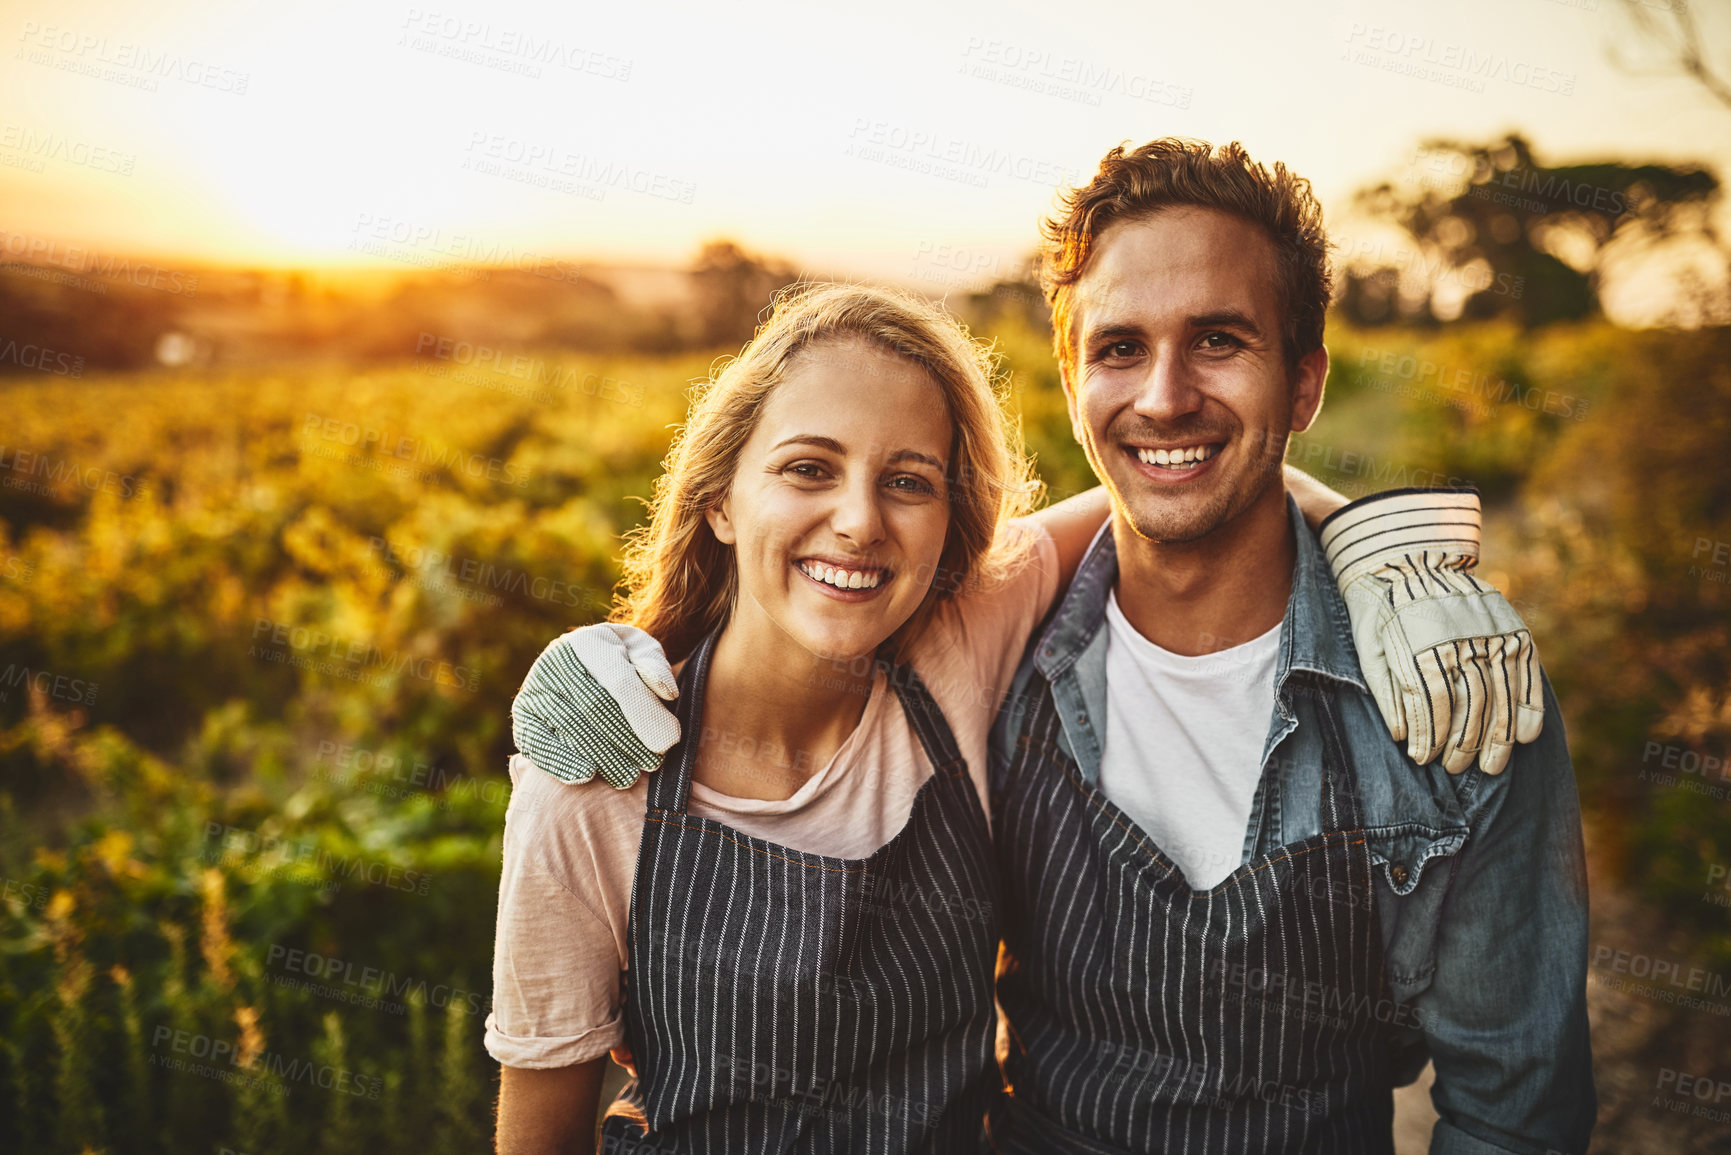 Buy stock photo Portrait of a happy young man and woman working together on a farm